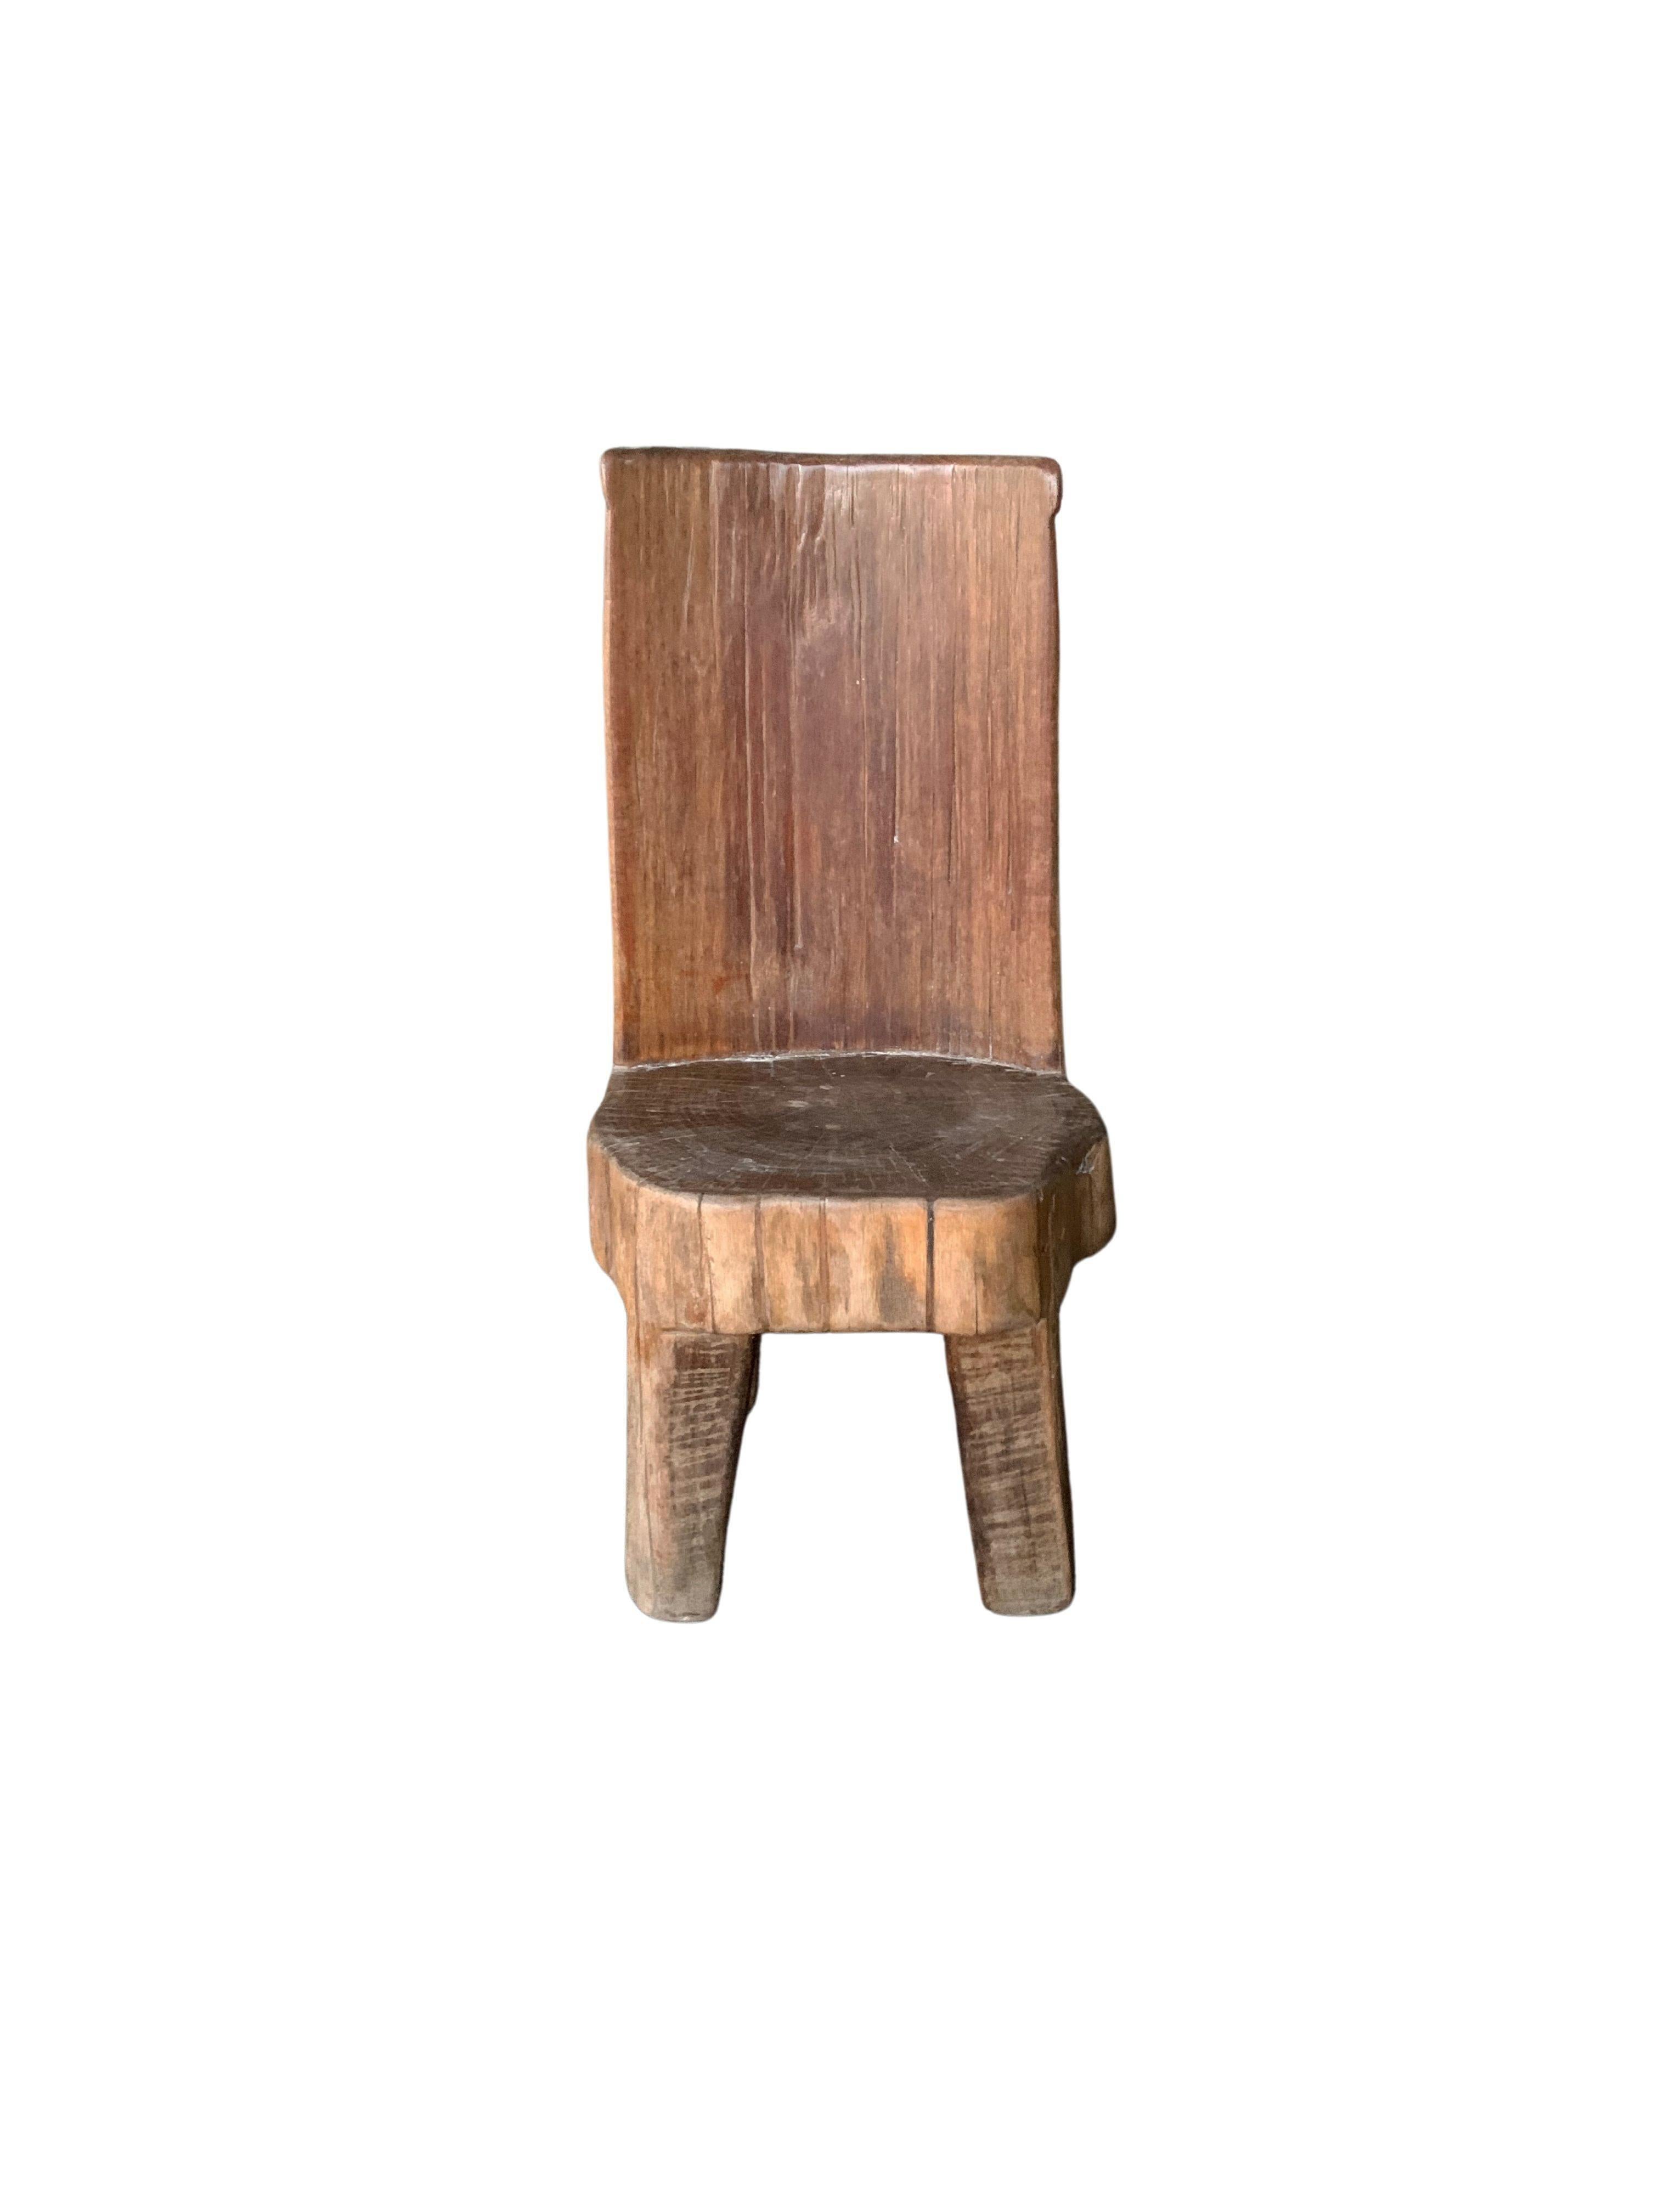 This mini stool from the late 20th century features a beautiful wood texture, crafted from a solid block of teak. Stools such as these were used on the Island of Madura by workers in tobacco plantations as they cut and trimmed harvested tobacco.